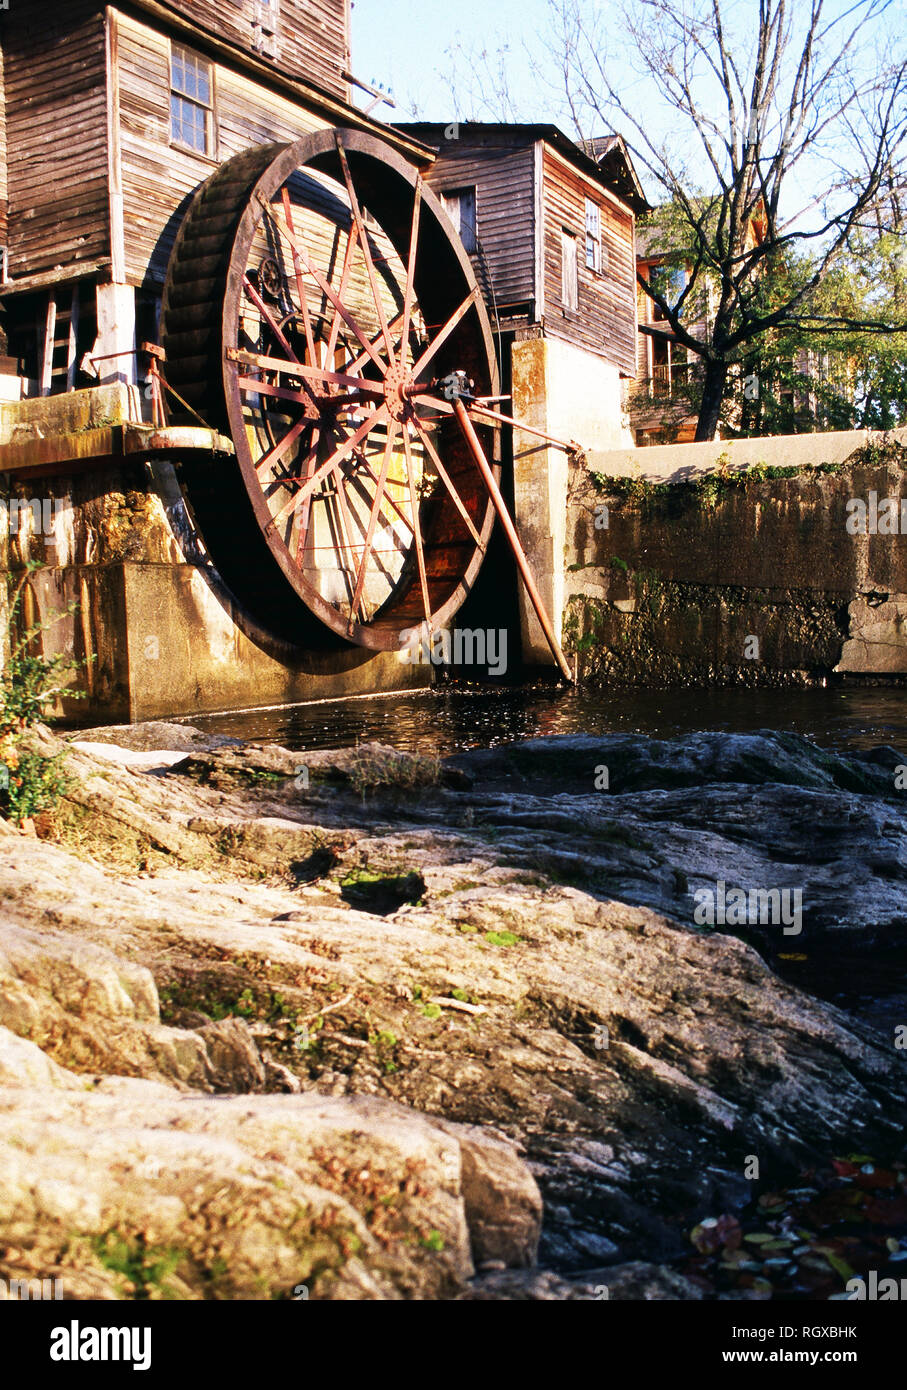 The Old Mill,Pigeon Forge, Tennessee Stock Photo